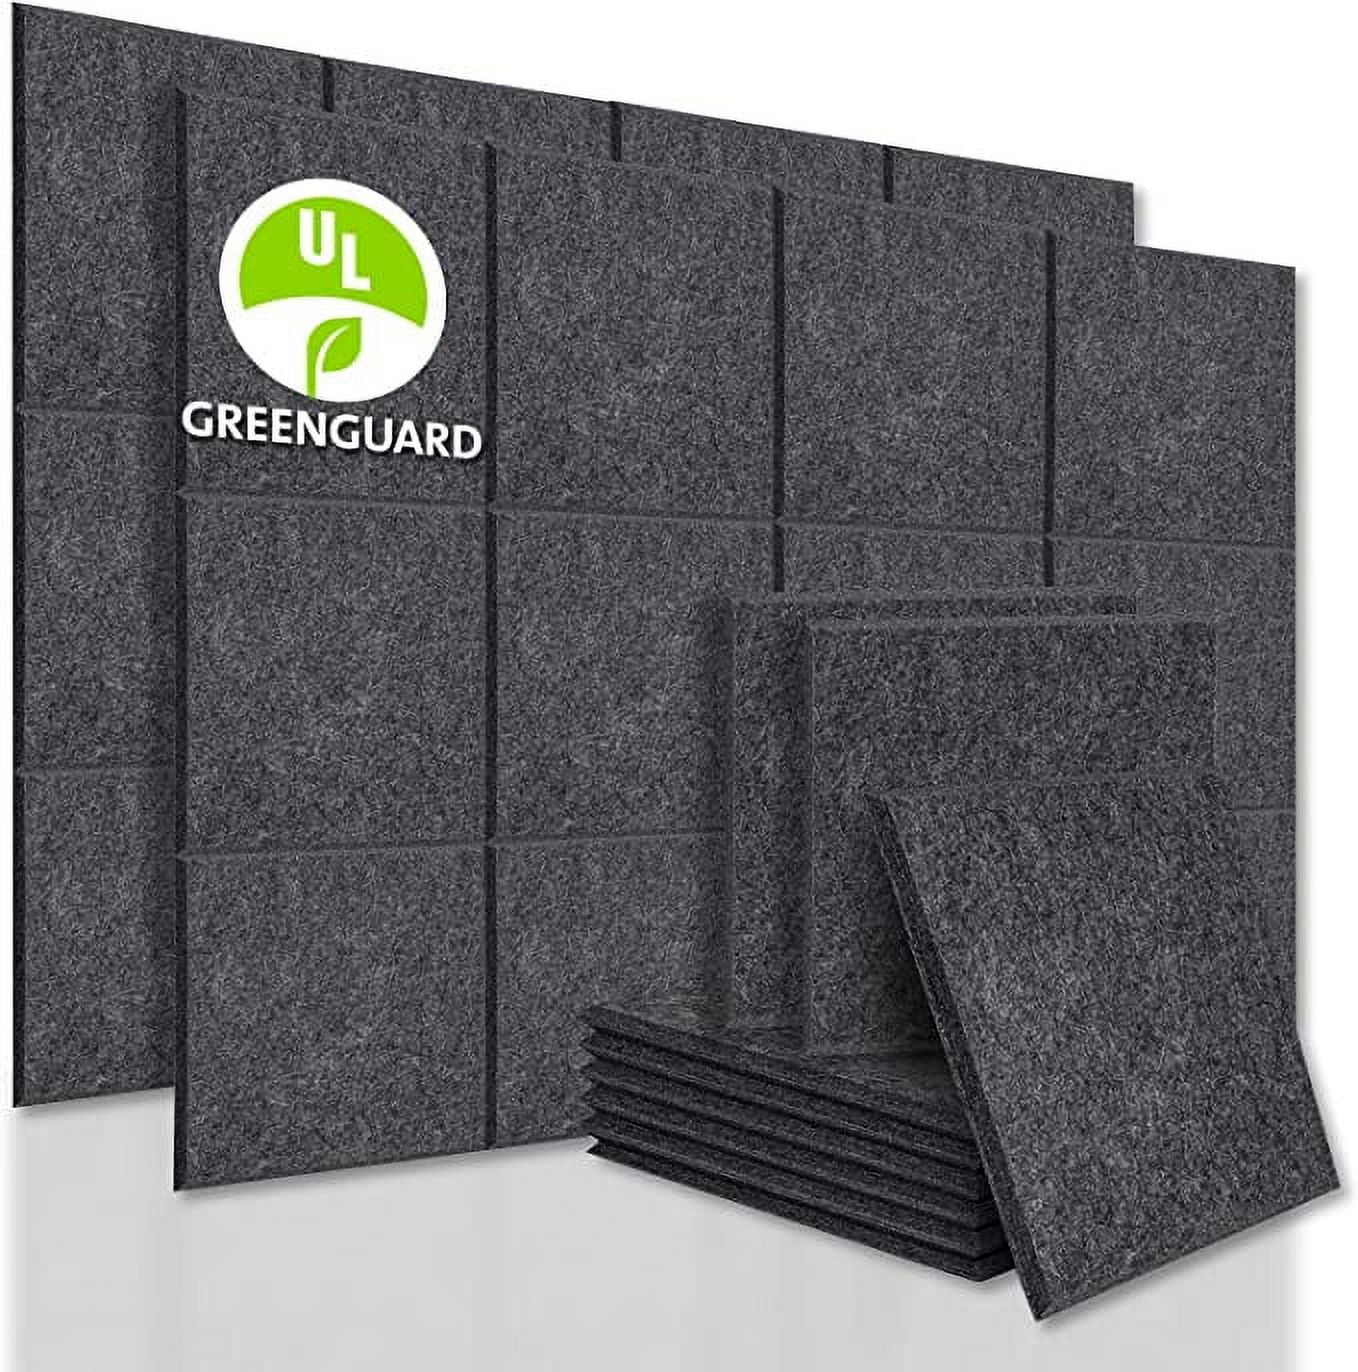 Green Acoustic Foam Sound Absorption Panels - Soundproof Store –  SoundproofStore